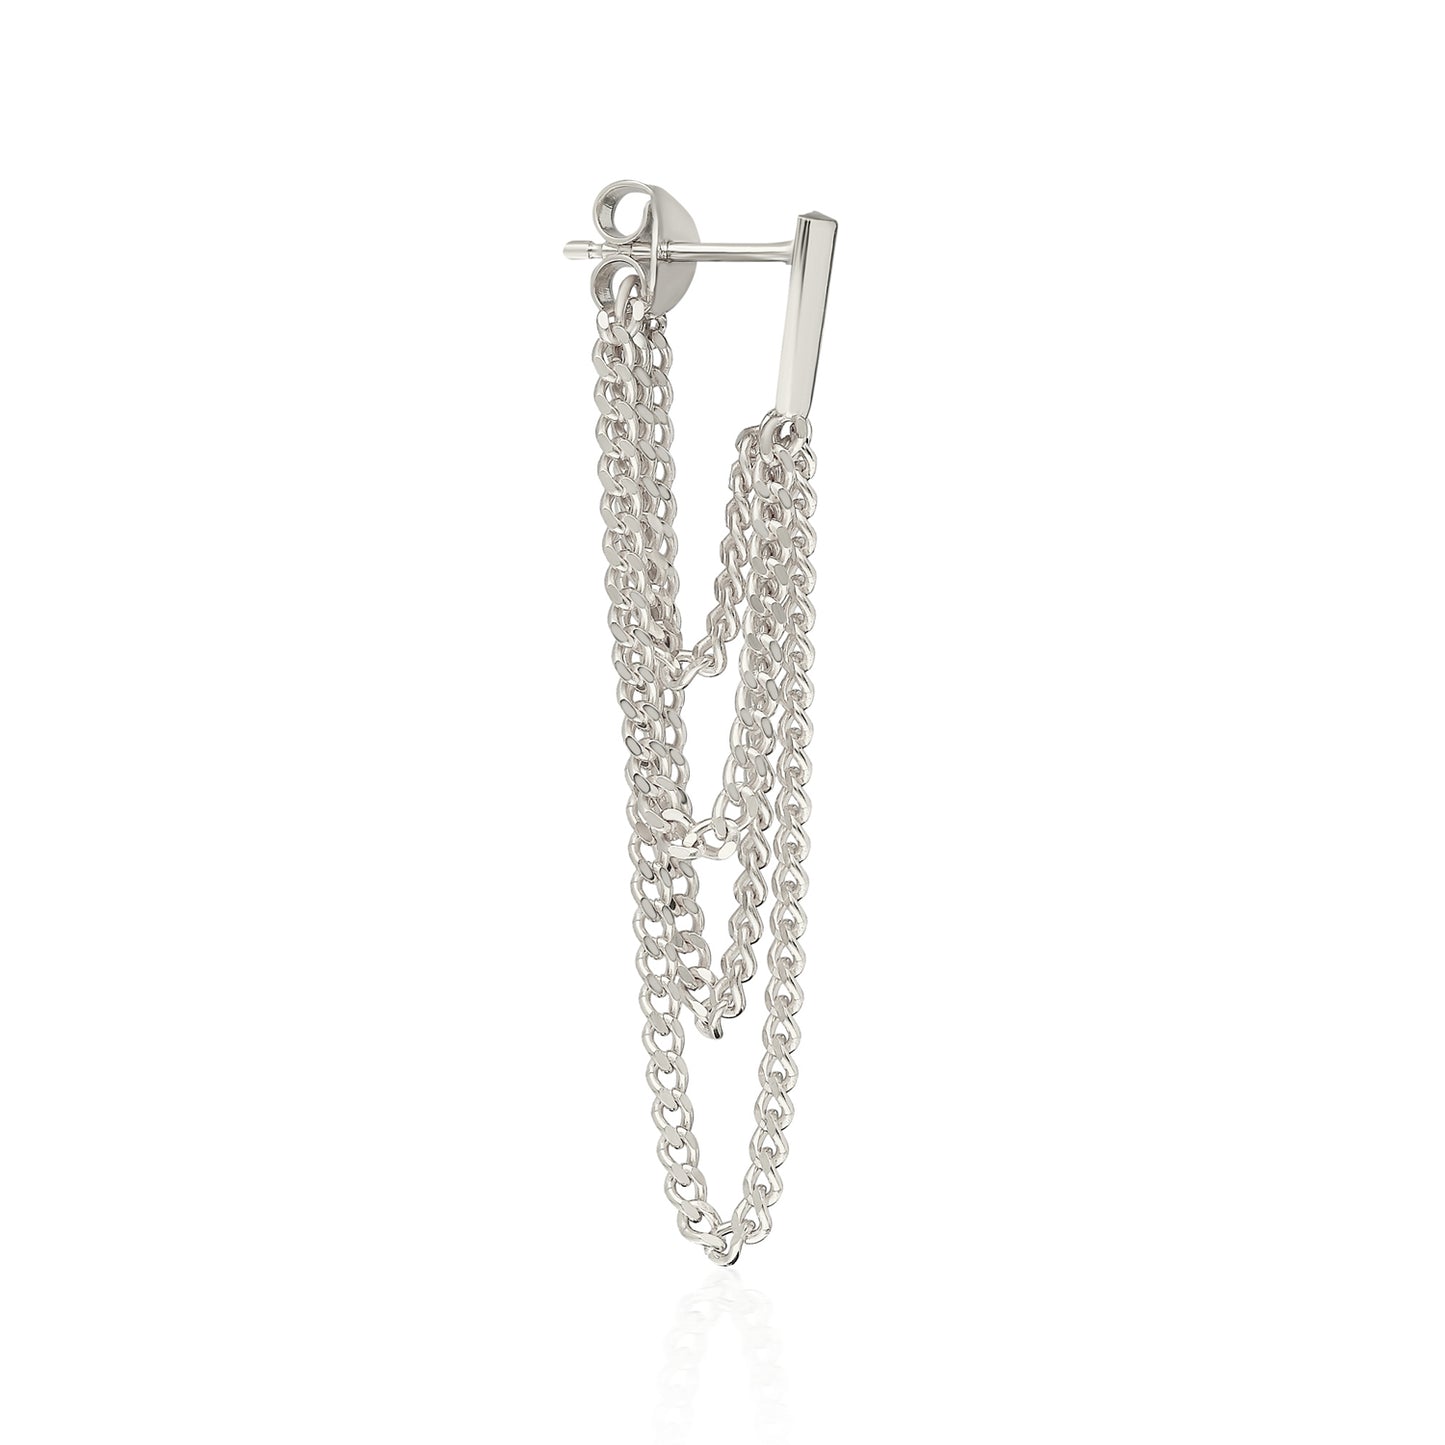 Terry Curb Chain Earring